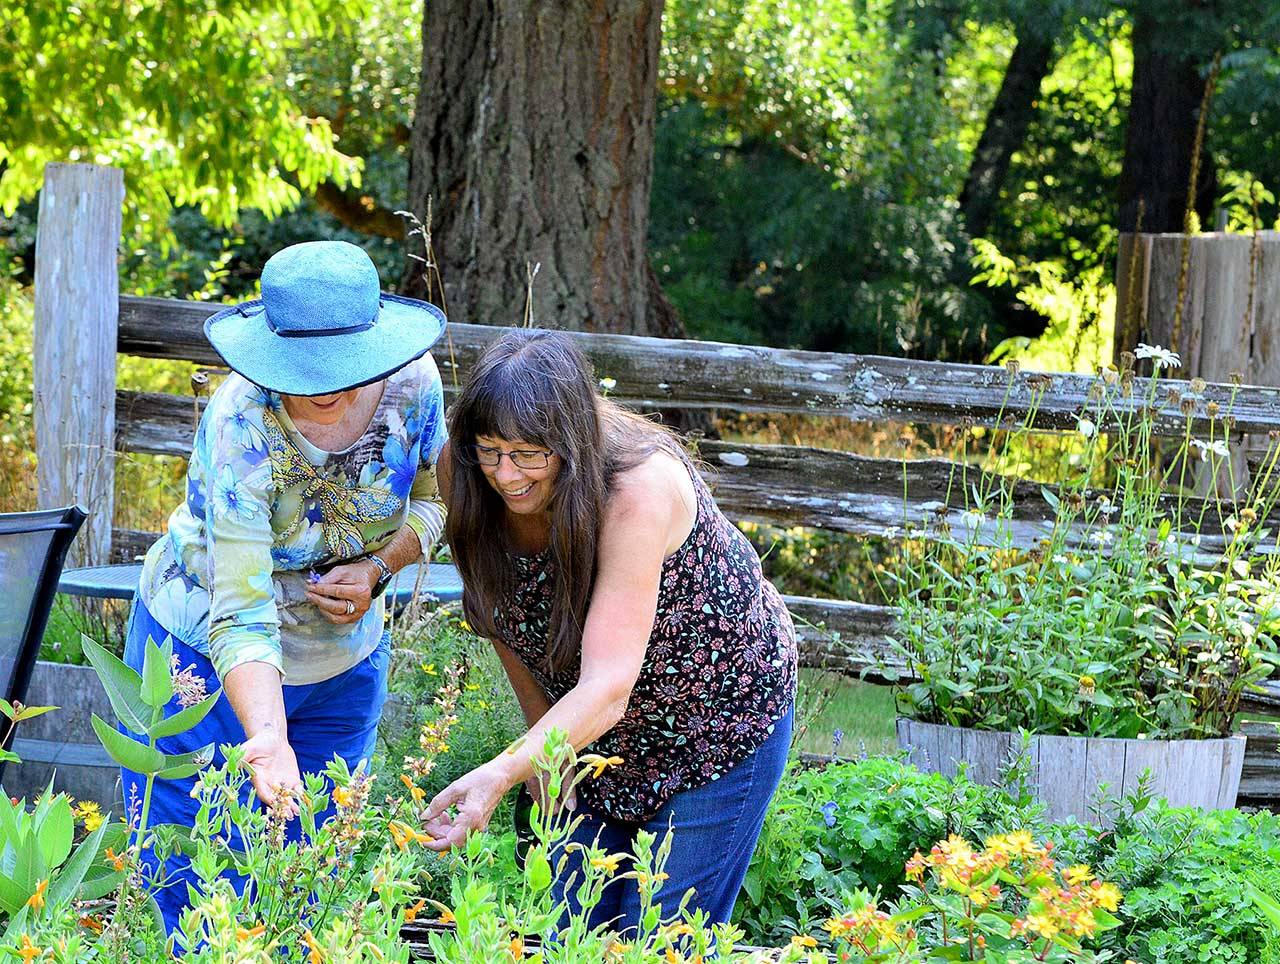 Just before the Concert in the Barn began Sunday afternoon, Diane Morris of Tempe, Ariz., and Lyn Morris of Bremerton walk among the flowers at Quilcenes Trillium Woods Farm. (Diane Urbani de la Paz/Peninsula Daily News)